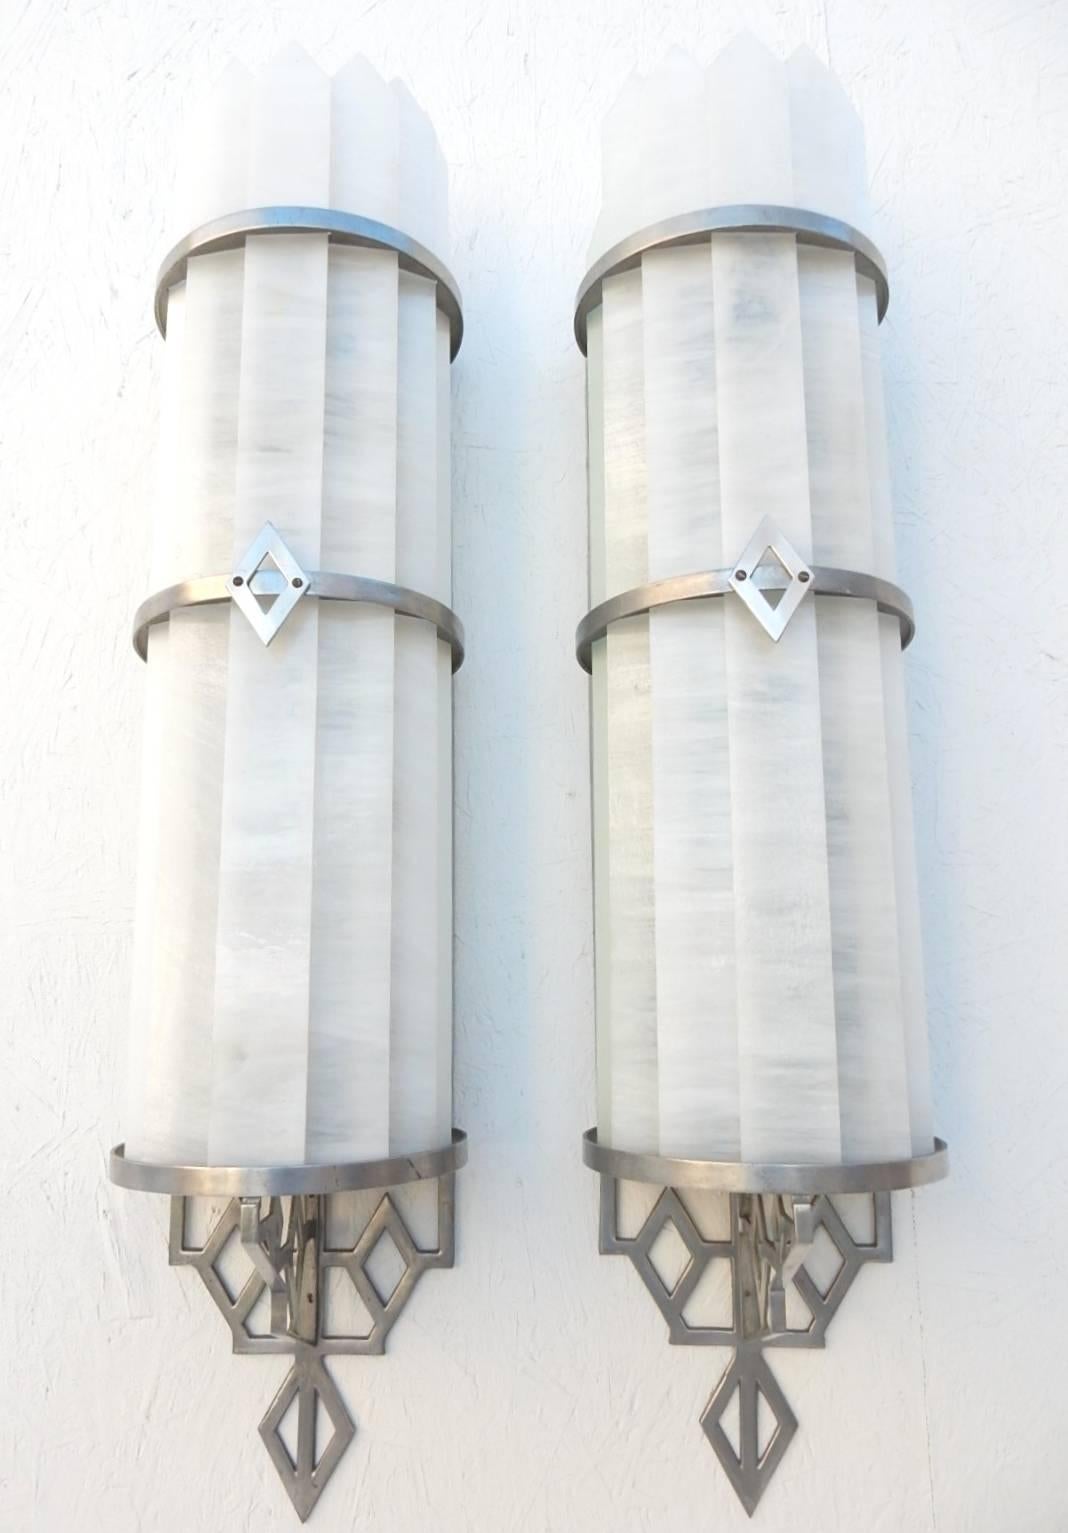 Incredible pair of circa 1930s slag glass and polished aluminum wall lamp sconces from a Los Angeles theater, They measure over 3 feet tall.
Each has ten bulbs and three toggle switches for soft to full bright use.
Shades consist of 9 